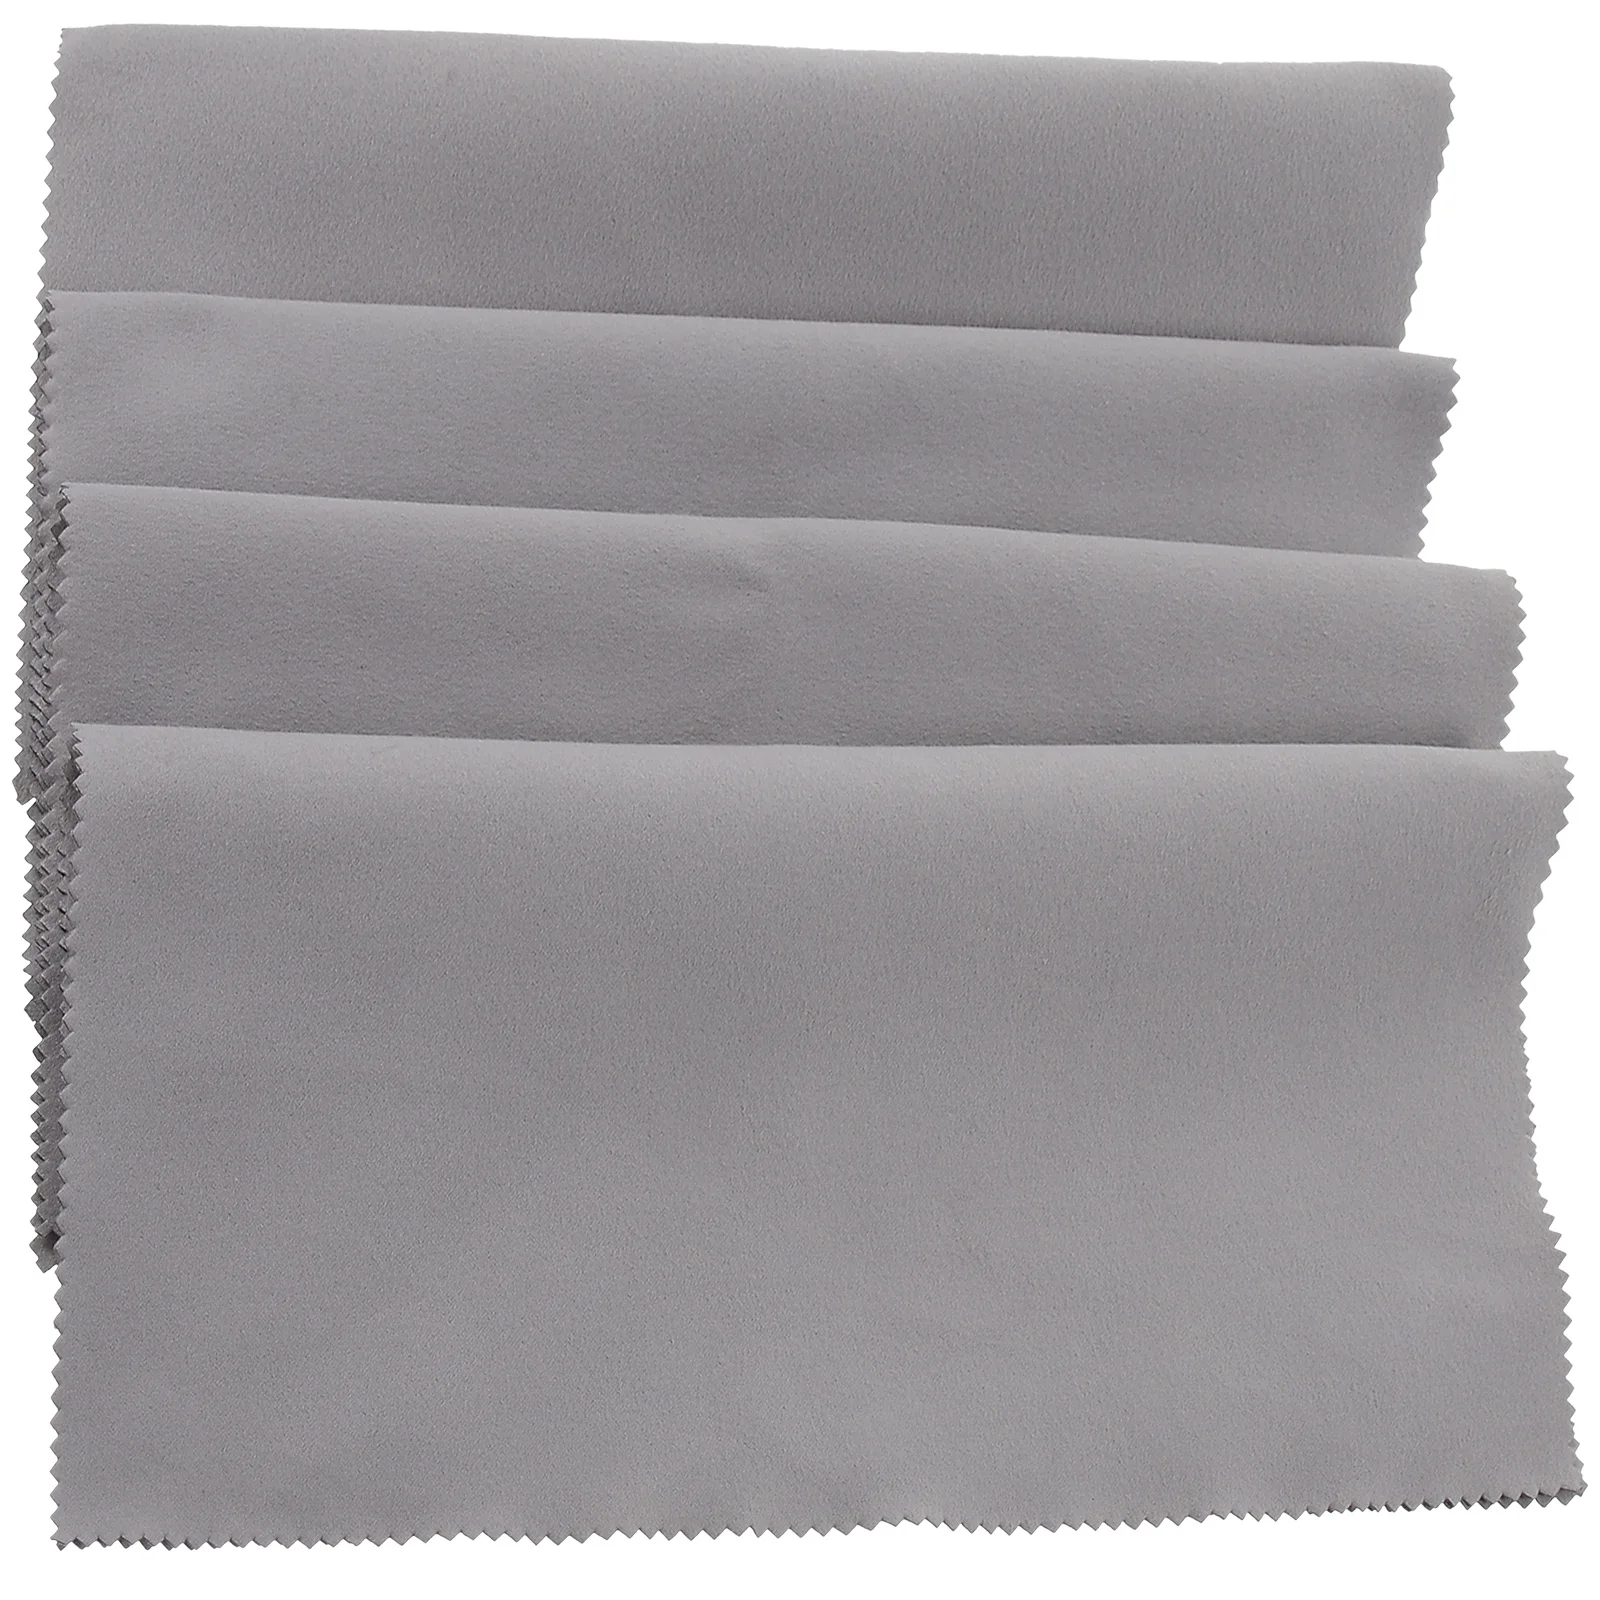 

4pcs Microfiber Cleaning Cloths for Musical Instruments Guitar Piano Cleaning Cloths